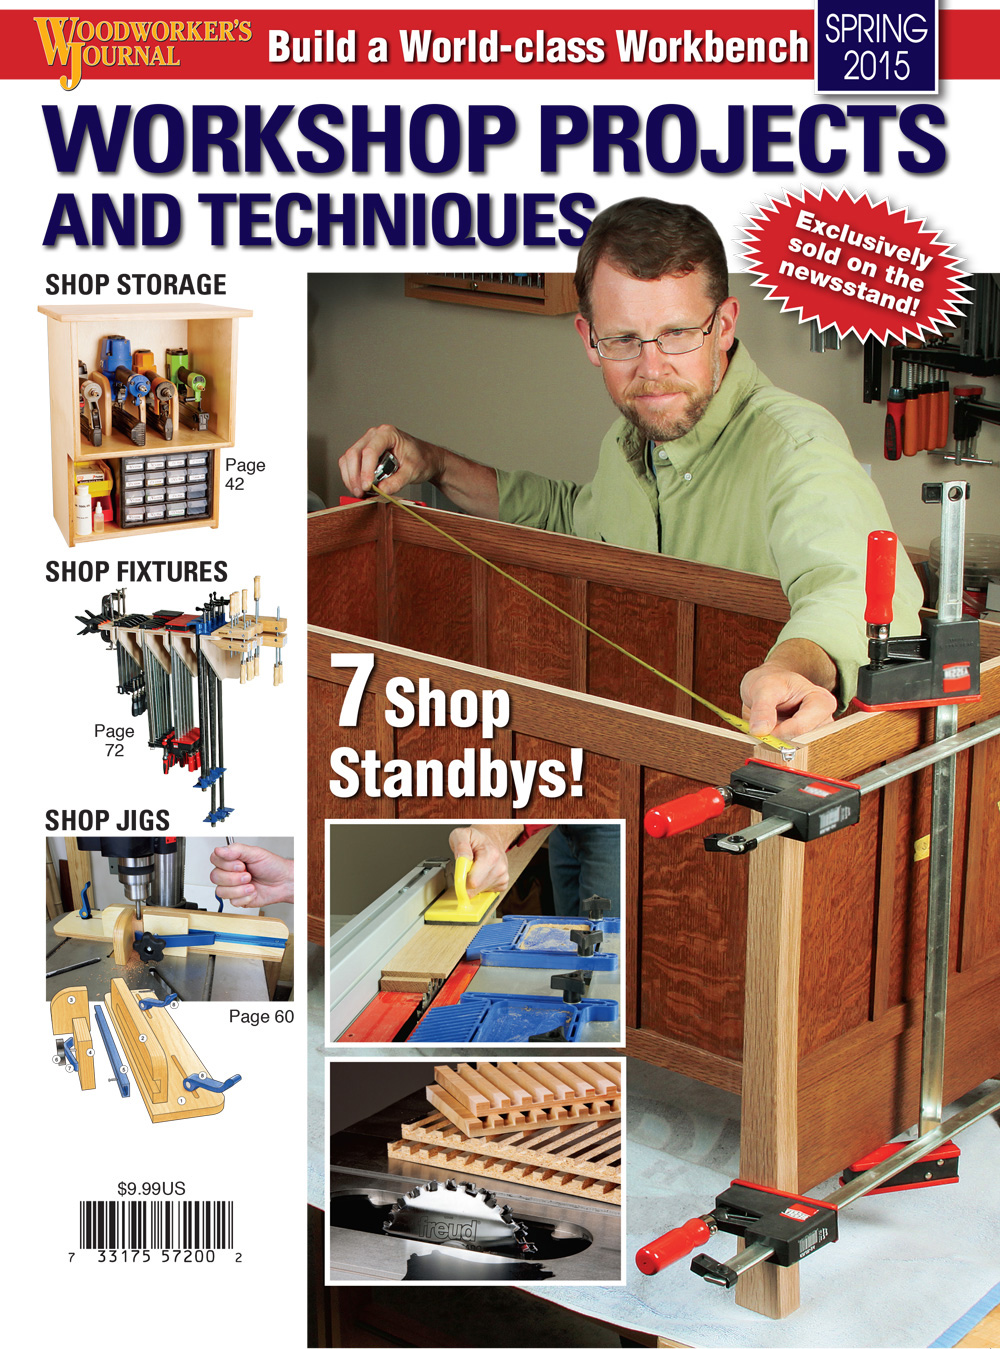 Where does a woodworker most like spending time? In the workshop, of course! We've gathered together a wealth of projects and techniques to make your time there even more rewarding. You'll find a guide to the tools to add to your first collection, plus kudos to standbys that our editor has come to rely on after decades of shop time. We provide you with a plan for an heirloom quality European Workbench, as well as instructions for a quick, practical, easy-to-make All-Purpose Shop Table. The best methods for Keeping Your Shop Cool, the tips found in Pointers for Making Panels and a tutorial on how to Avoid Tearout, Read the Grain are all news-you-can-use for woodworkers of any level. You'll also find practical storage options like Clamp Racks